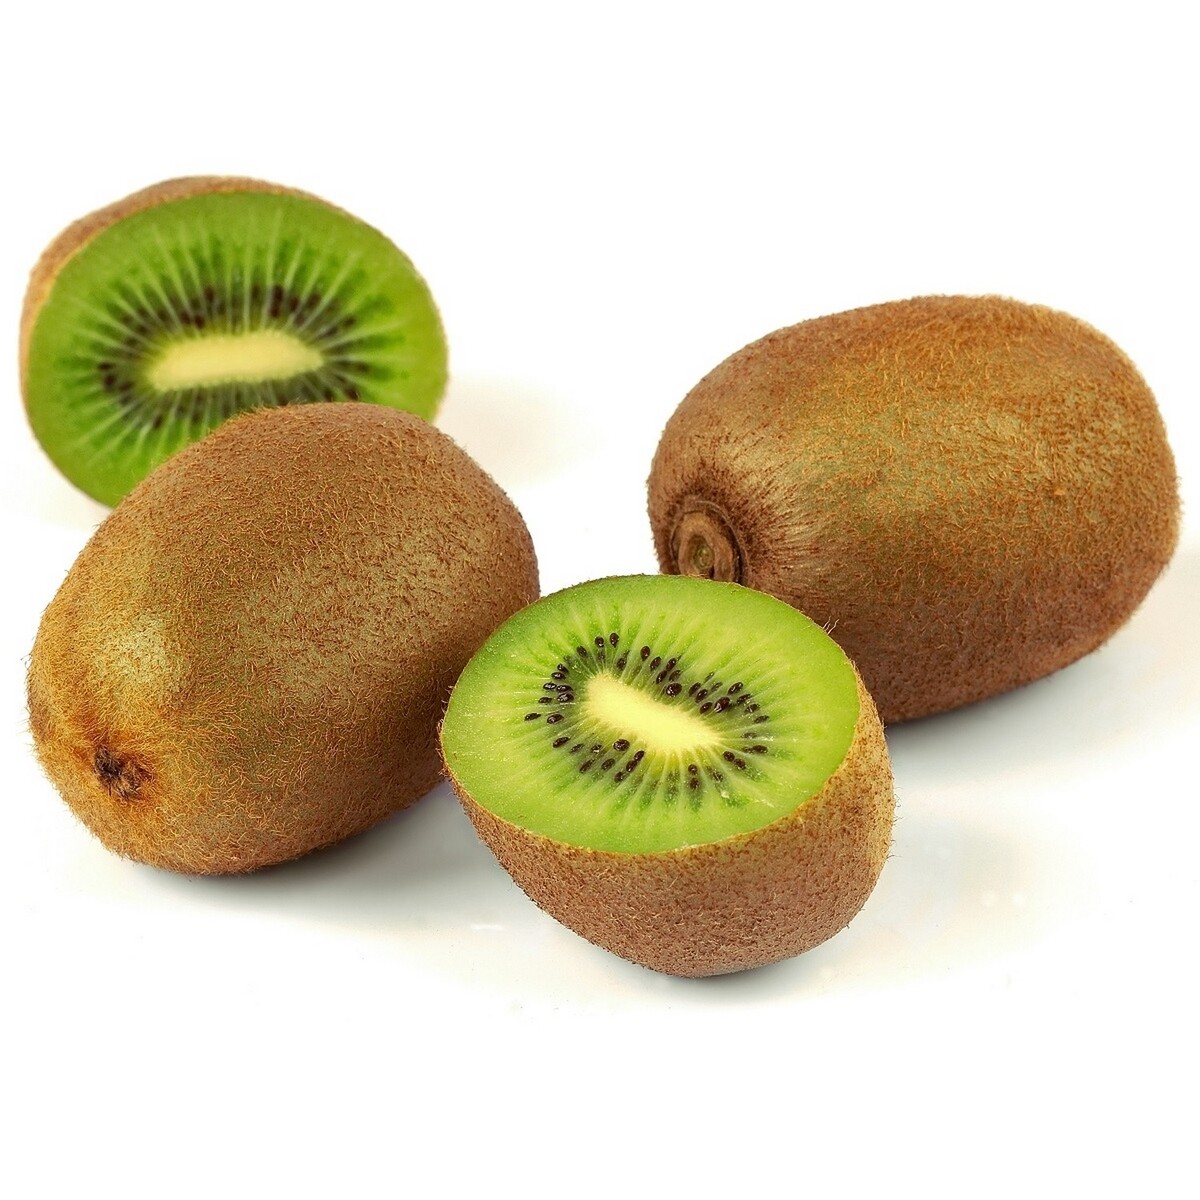 Kiwi Fruit Imported Approx. 1kg to 1.1kg